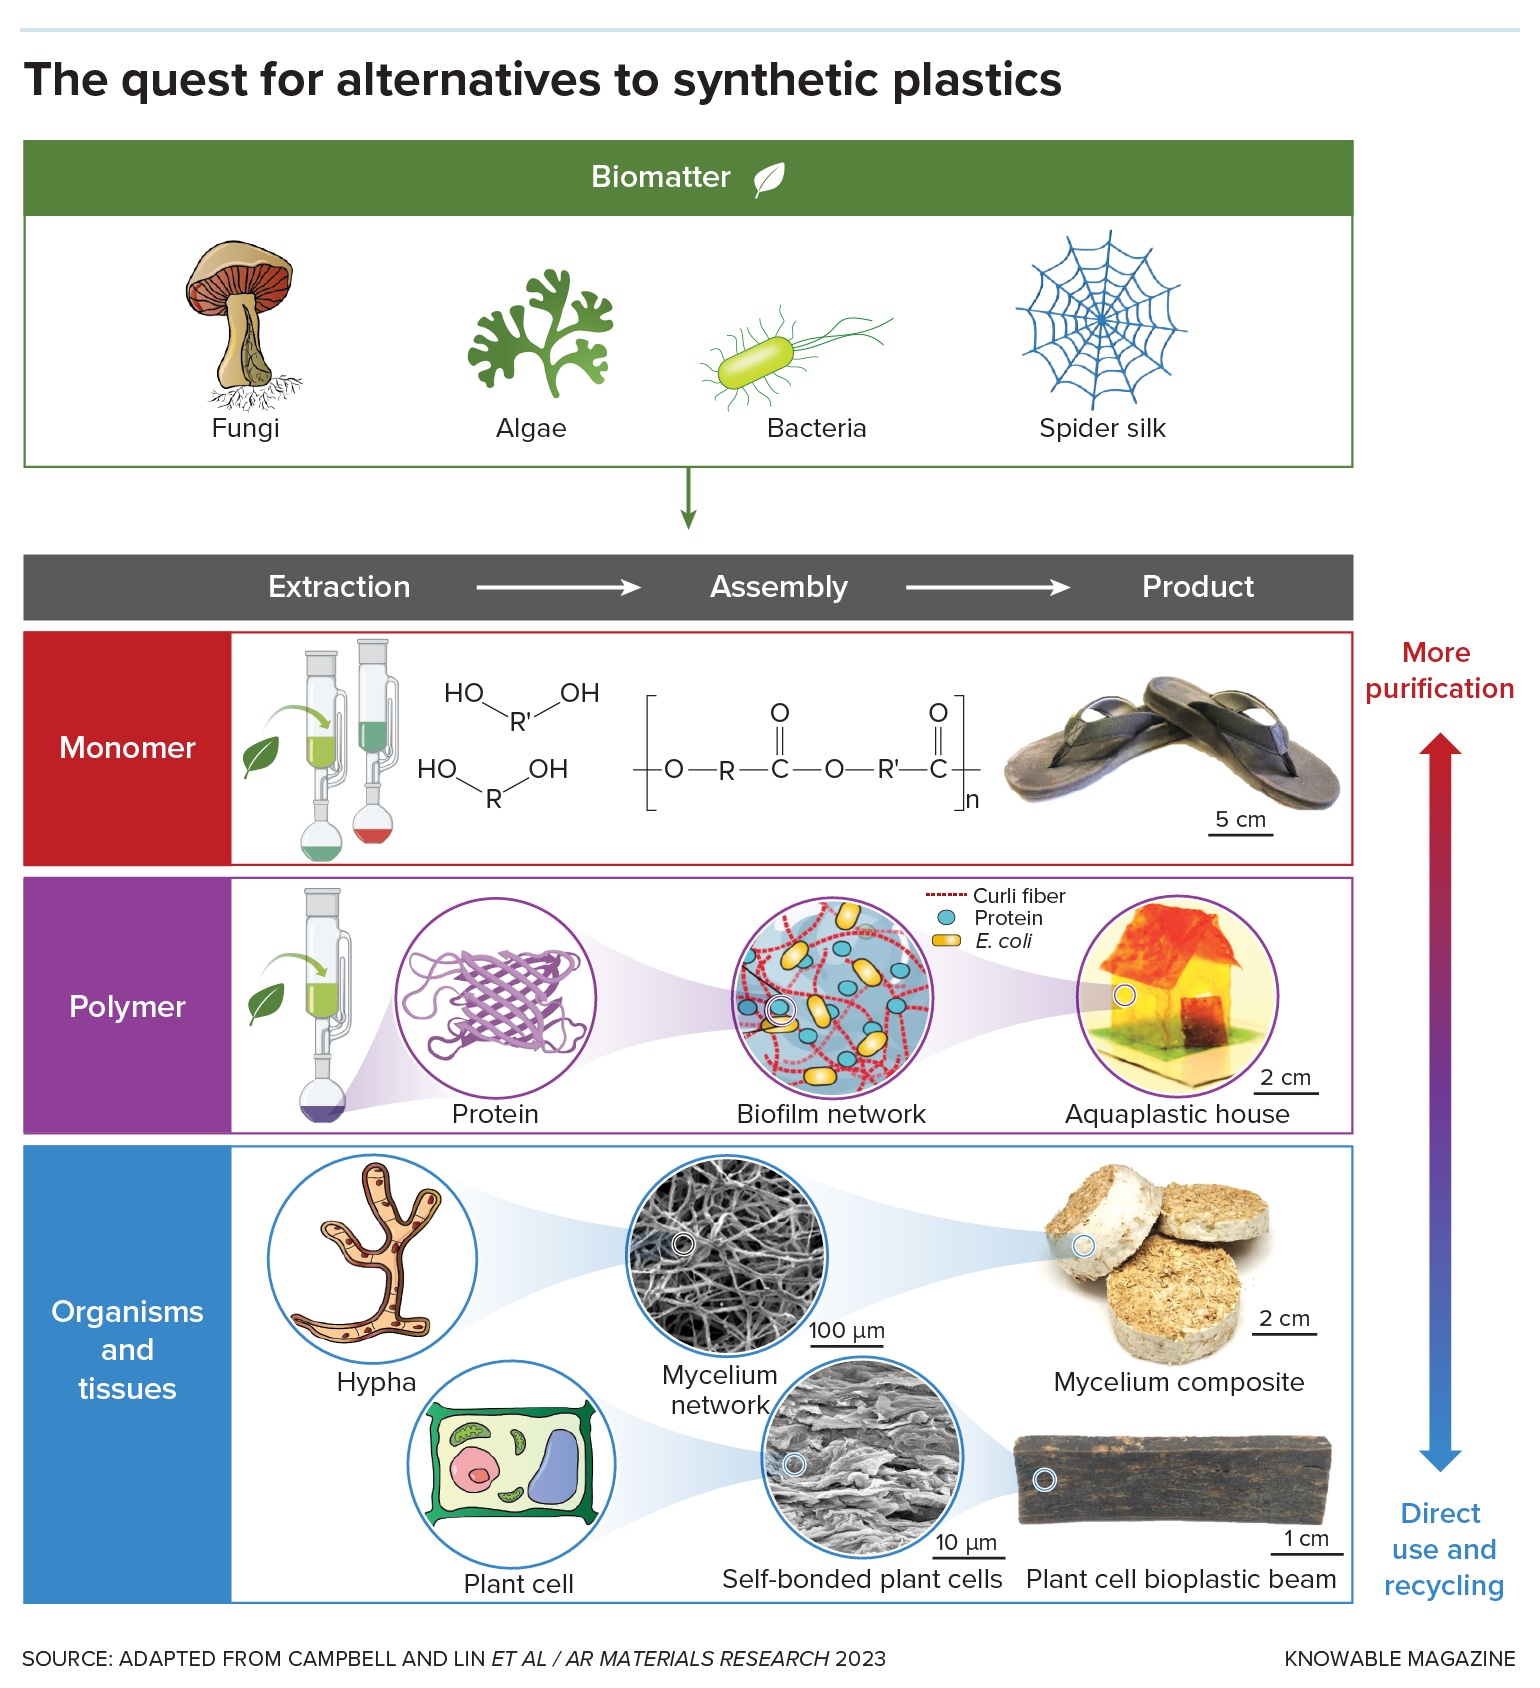 Graphic showing the quest for alternatives to synthetic plastics, displaying compostable plastic sources, production stages from monomer to product, and various biomaterial forms like mycelium and algae.